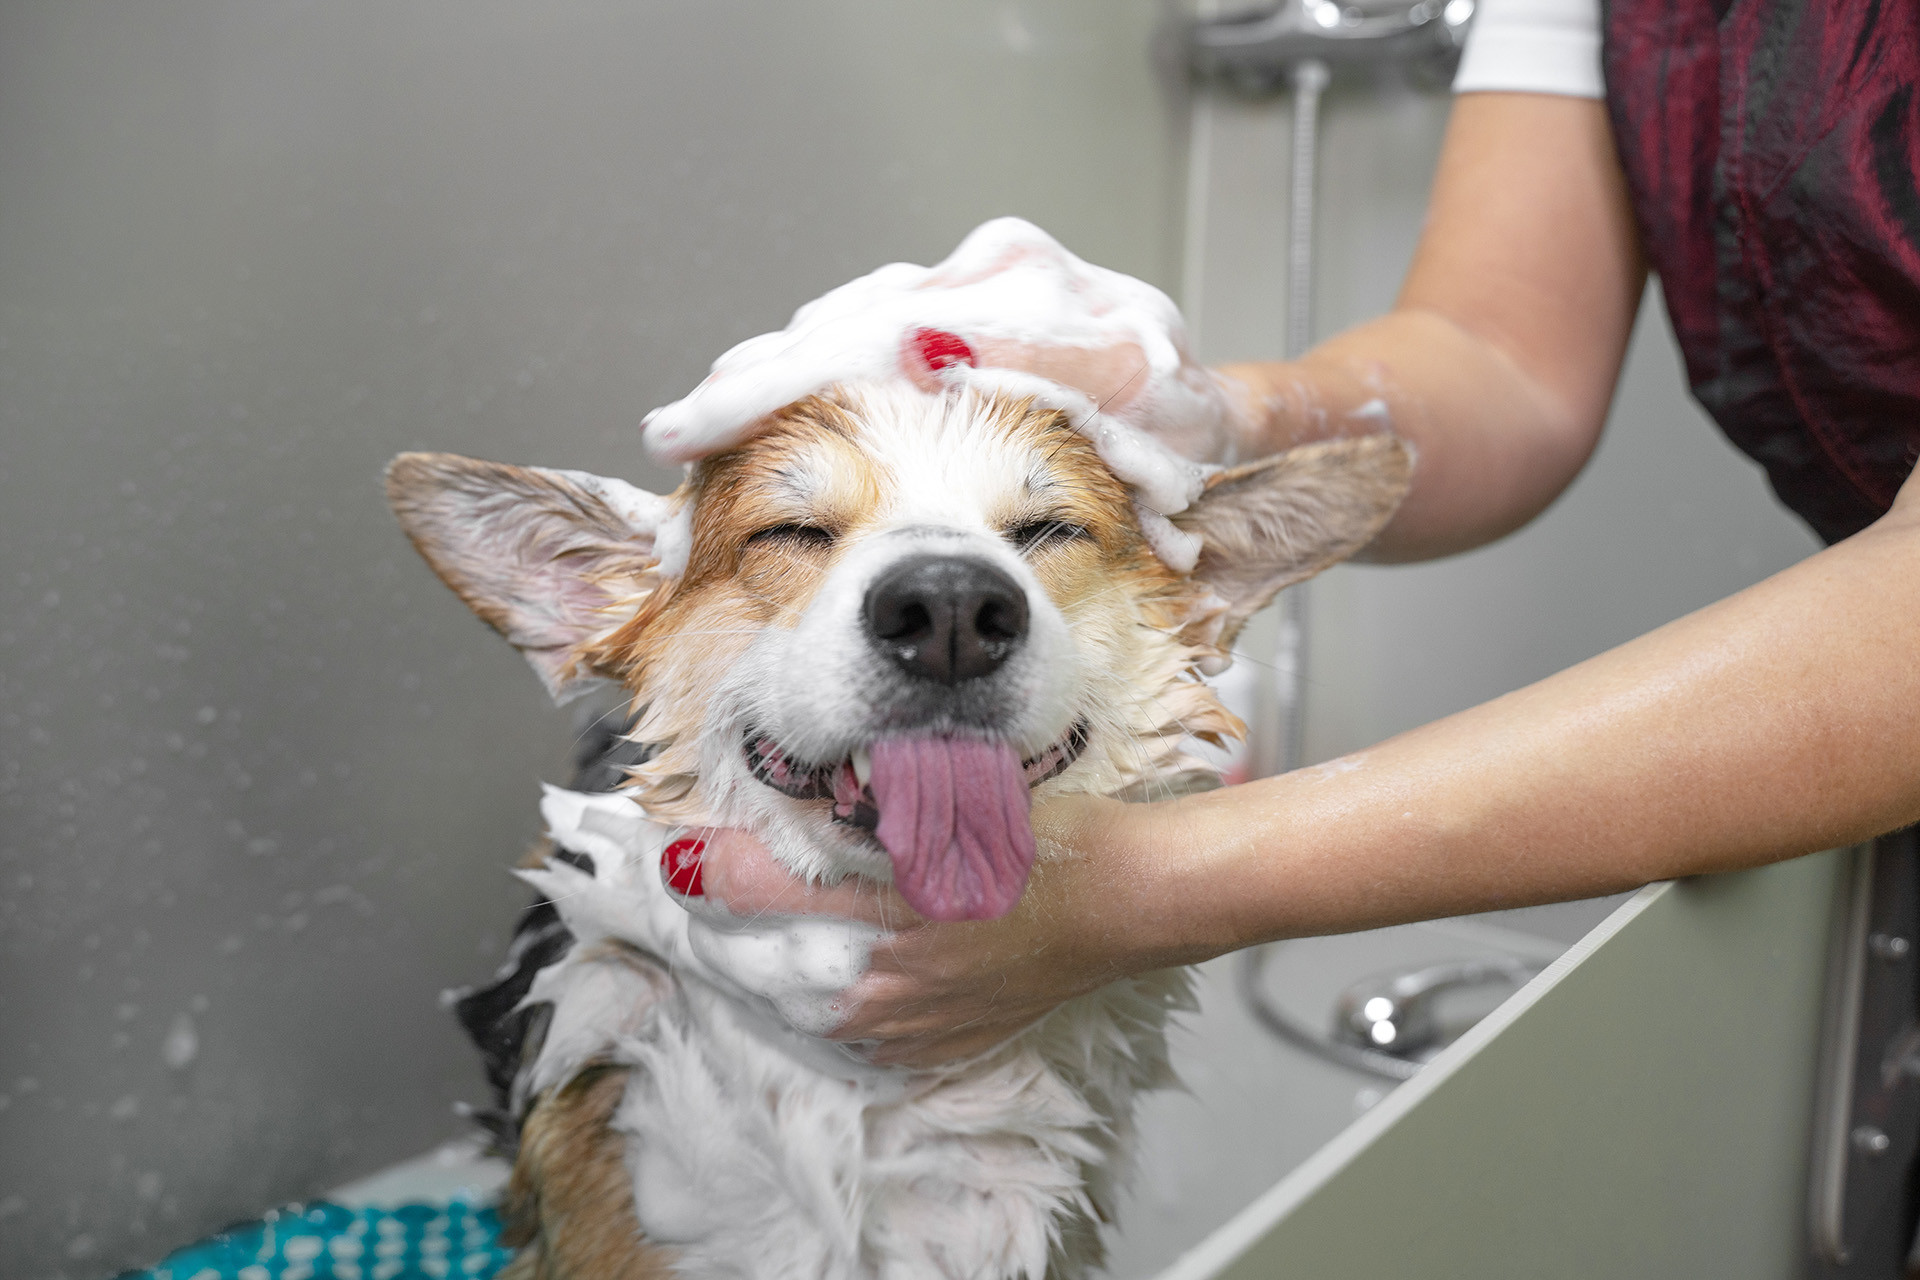 Doggie with tongue out enjoying his spa bath and grooming